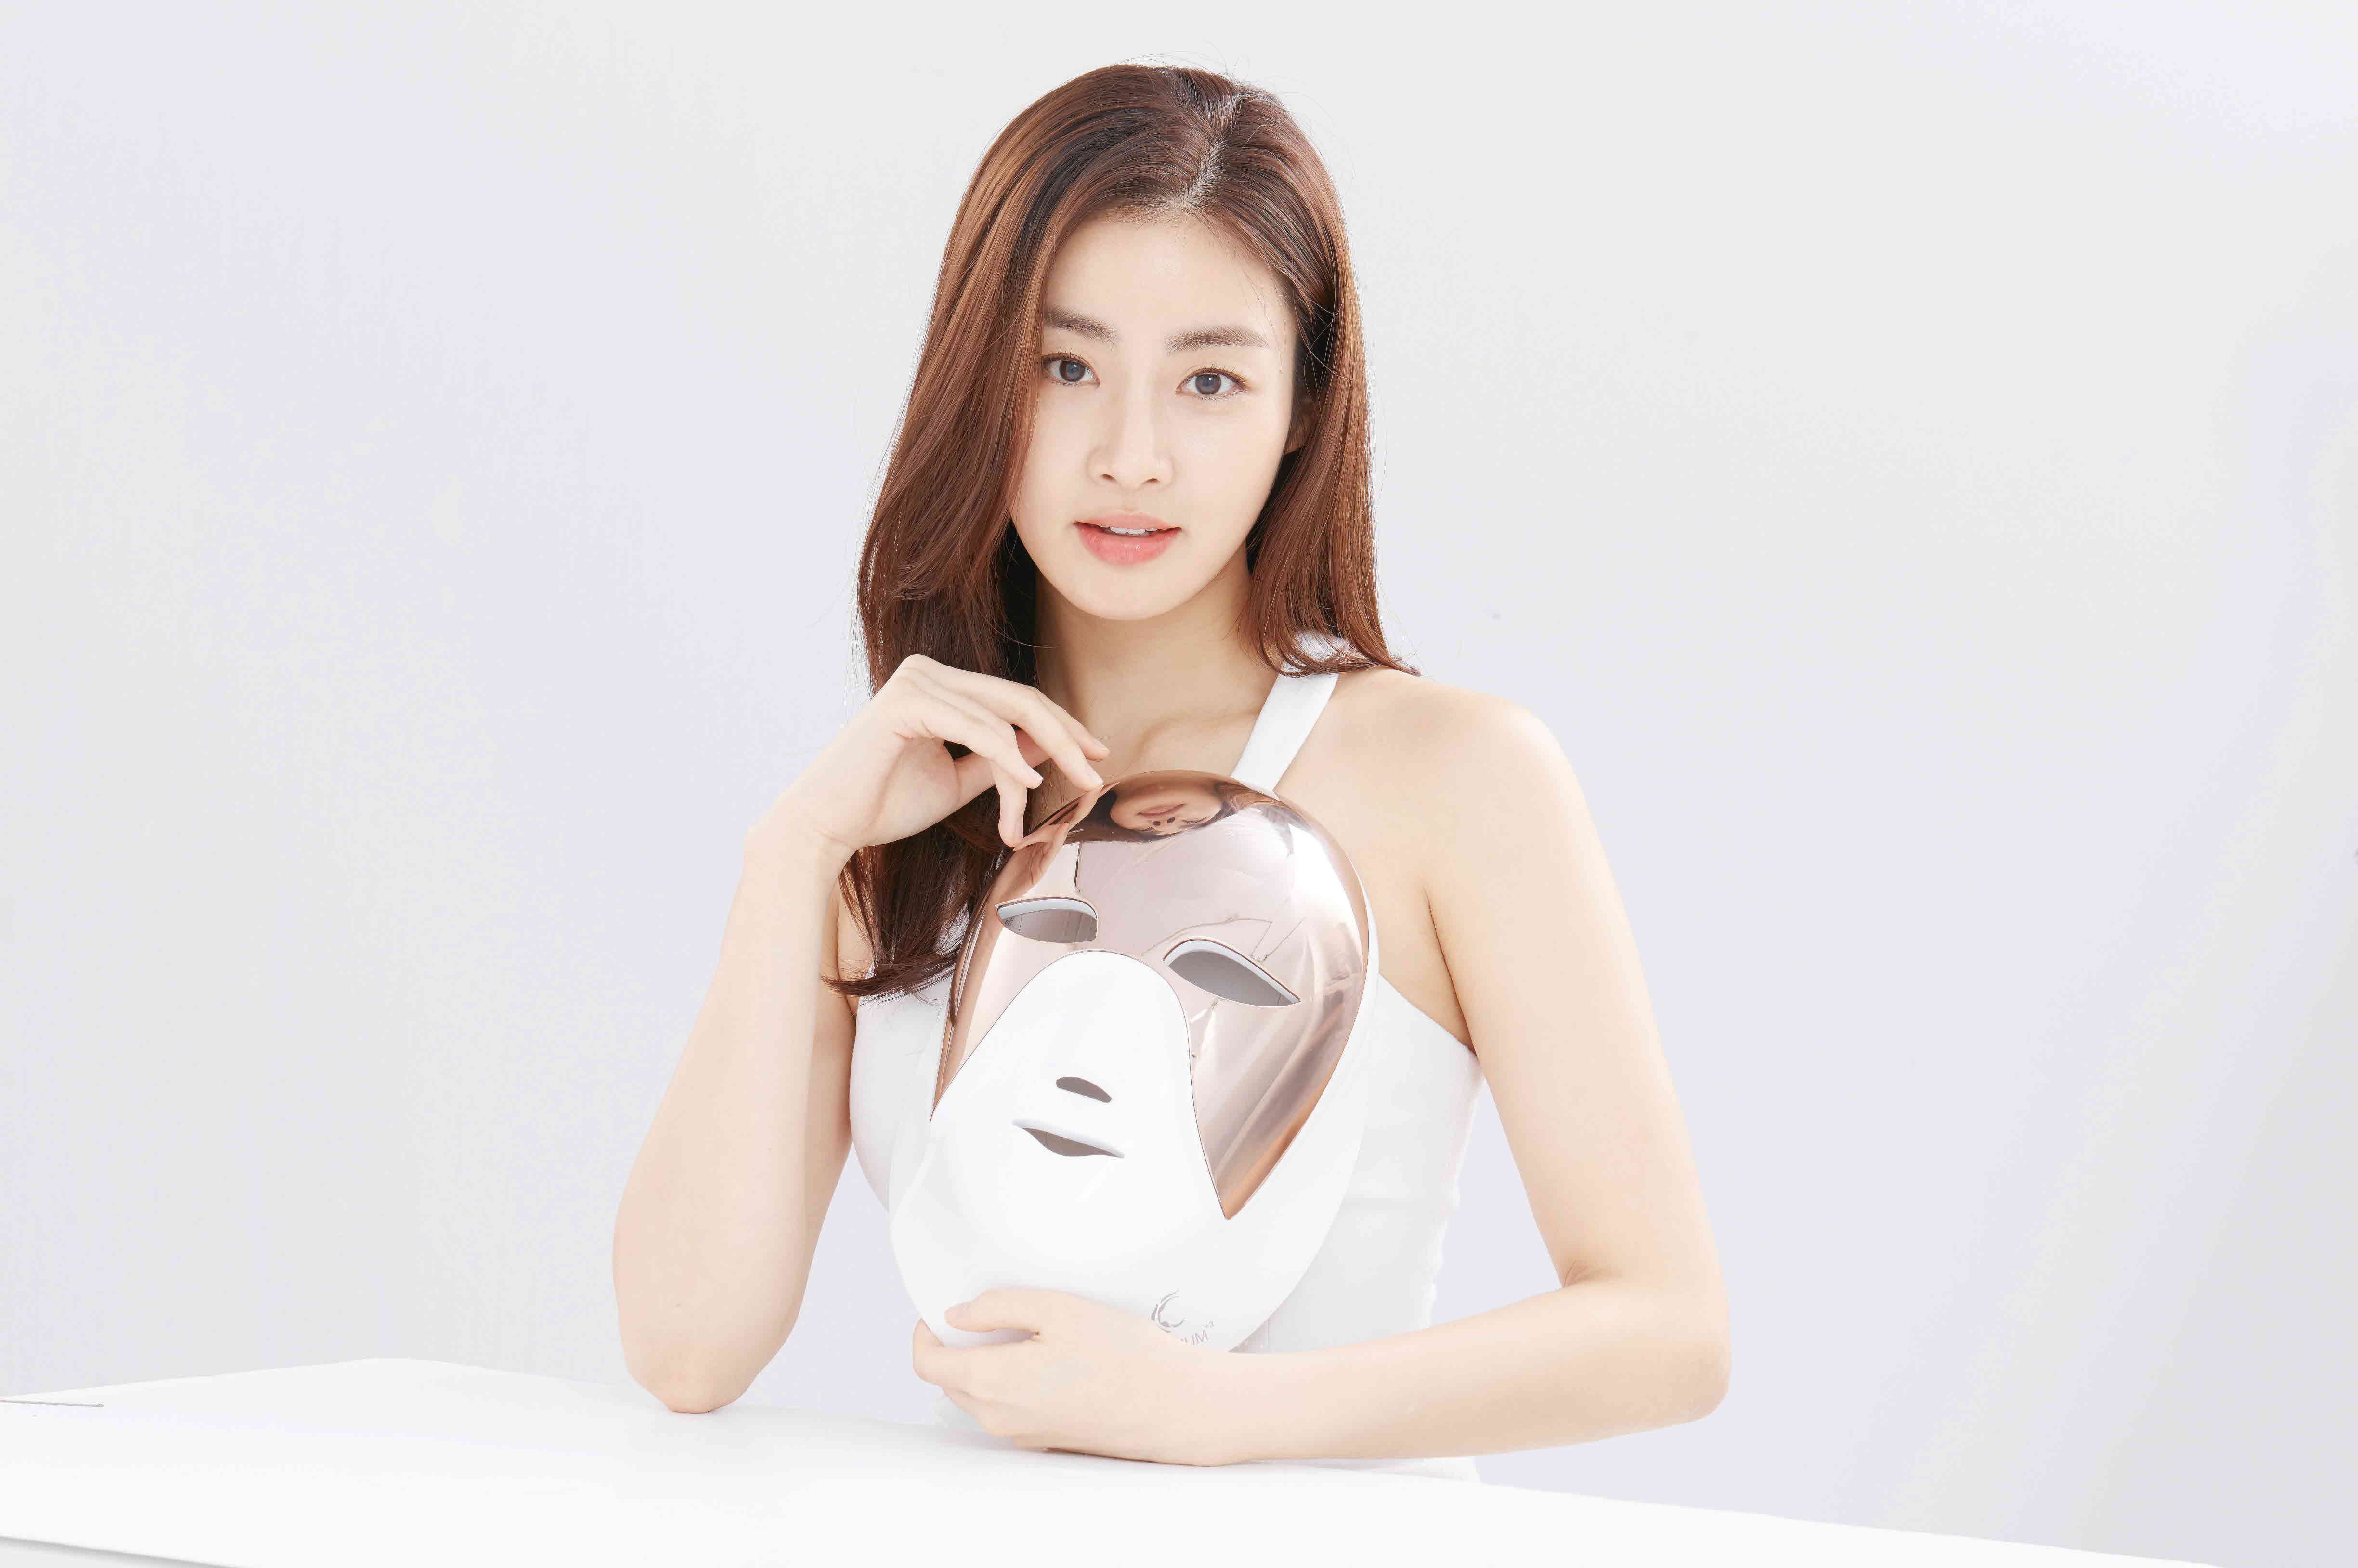 _Cellreturn_ LED light therapy mask _Facial_